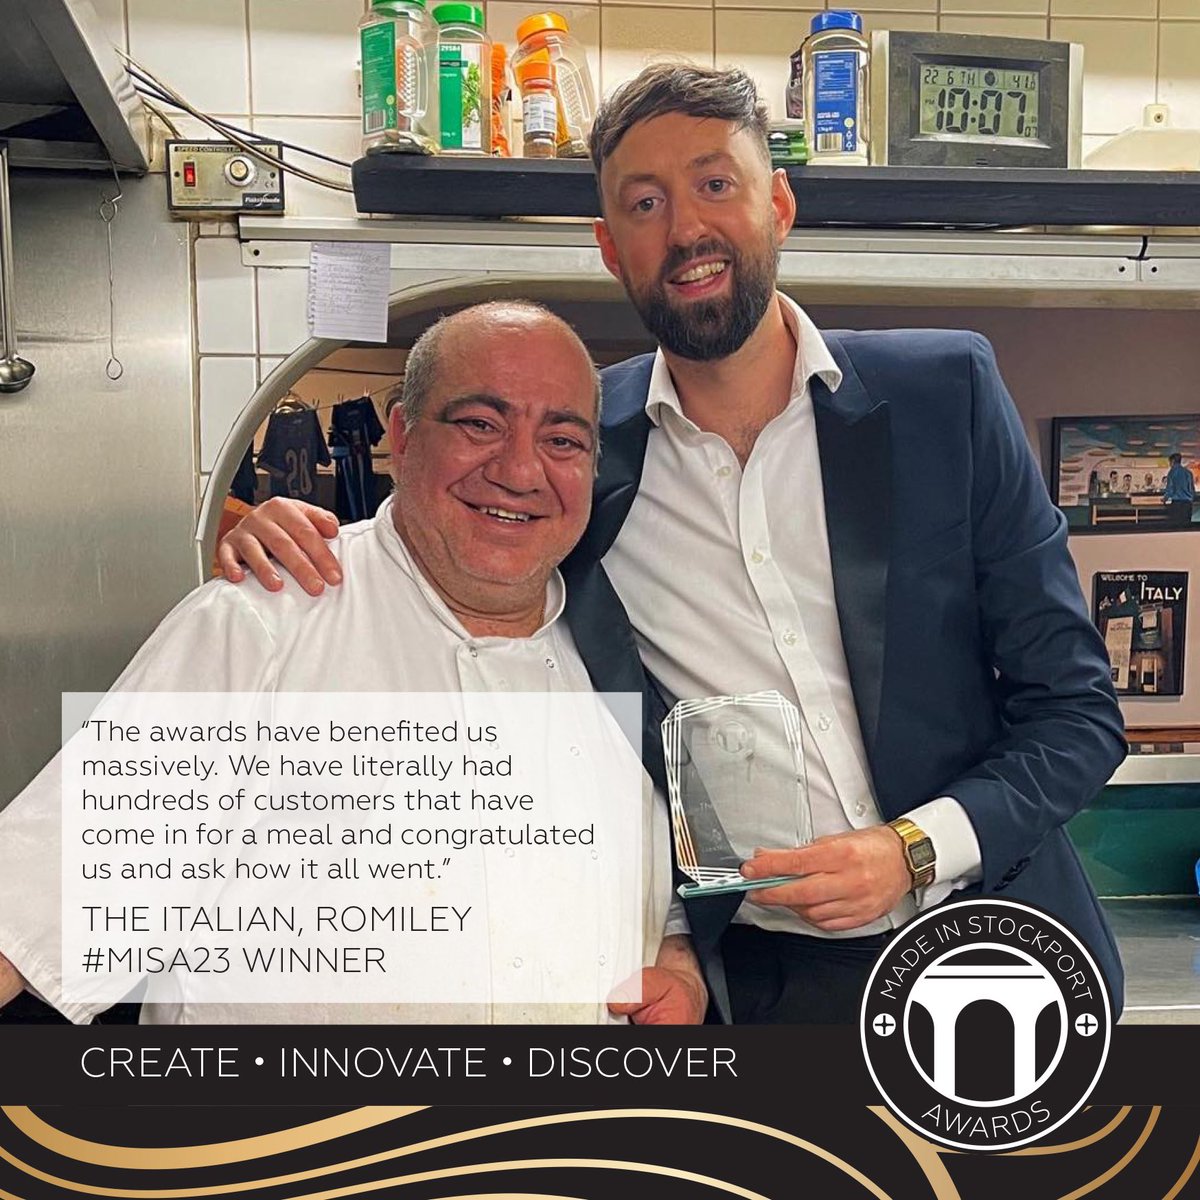 Want to know what past winners think about #MadeInStockport Awards? This is what @RomileyItalian has said 😊 #BusinessAwards #Stockport